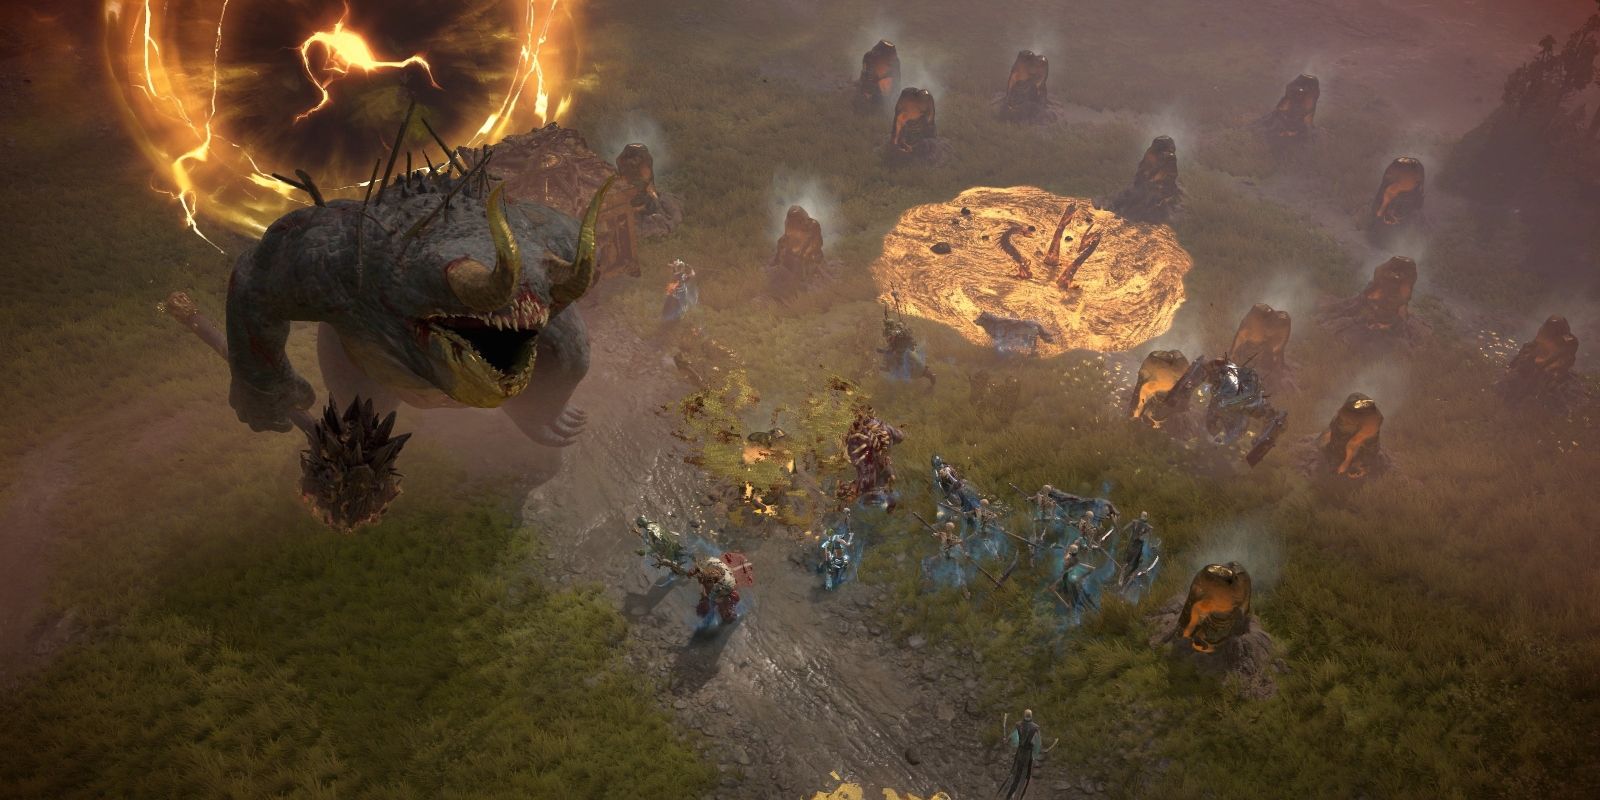 Diablo 4 gameplay showing a large treasure beast and a group of armed fighters